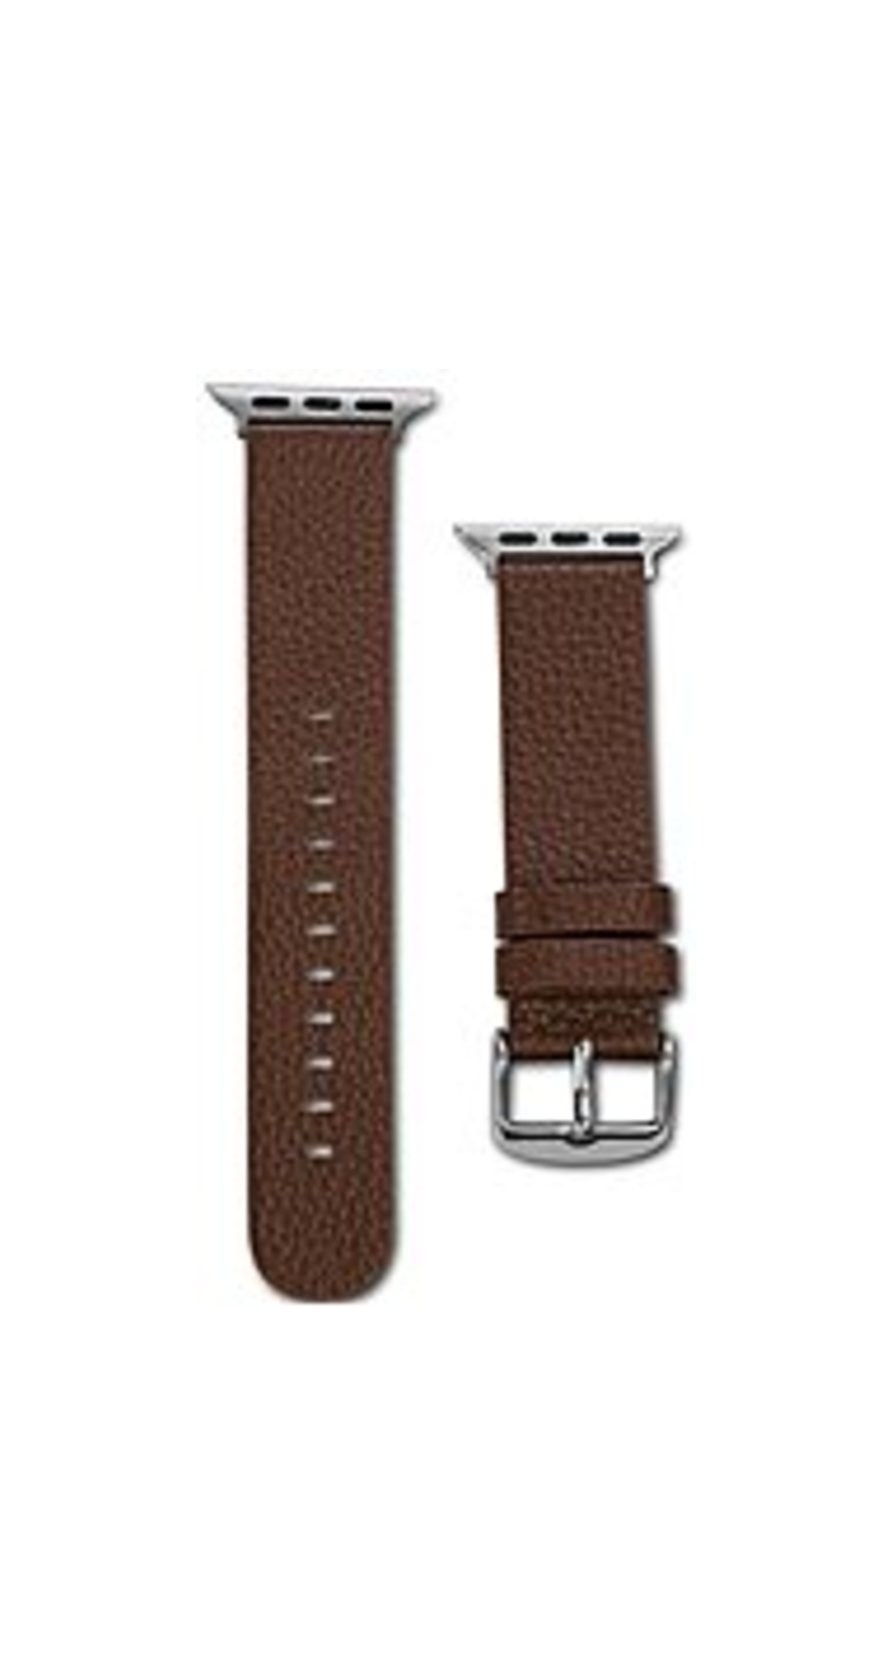 X-Doria 6950941439657 38mm Leather Lux Band for Apple Watch - Brown